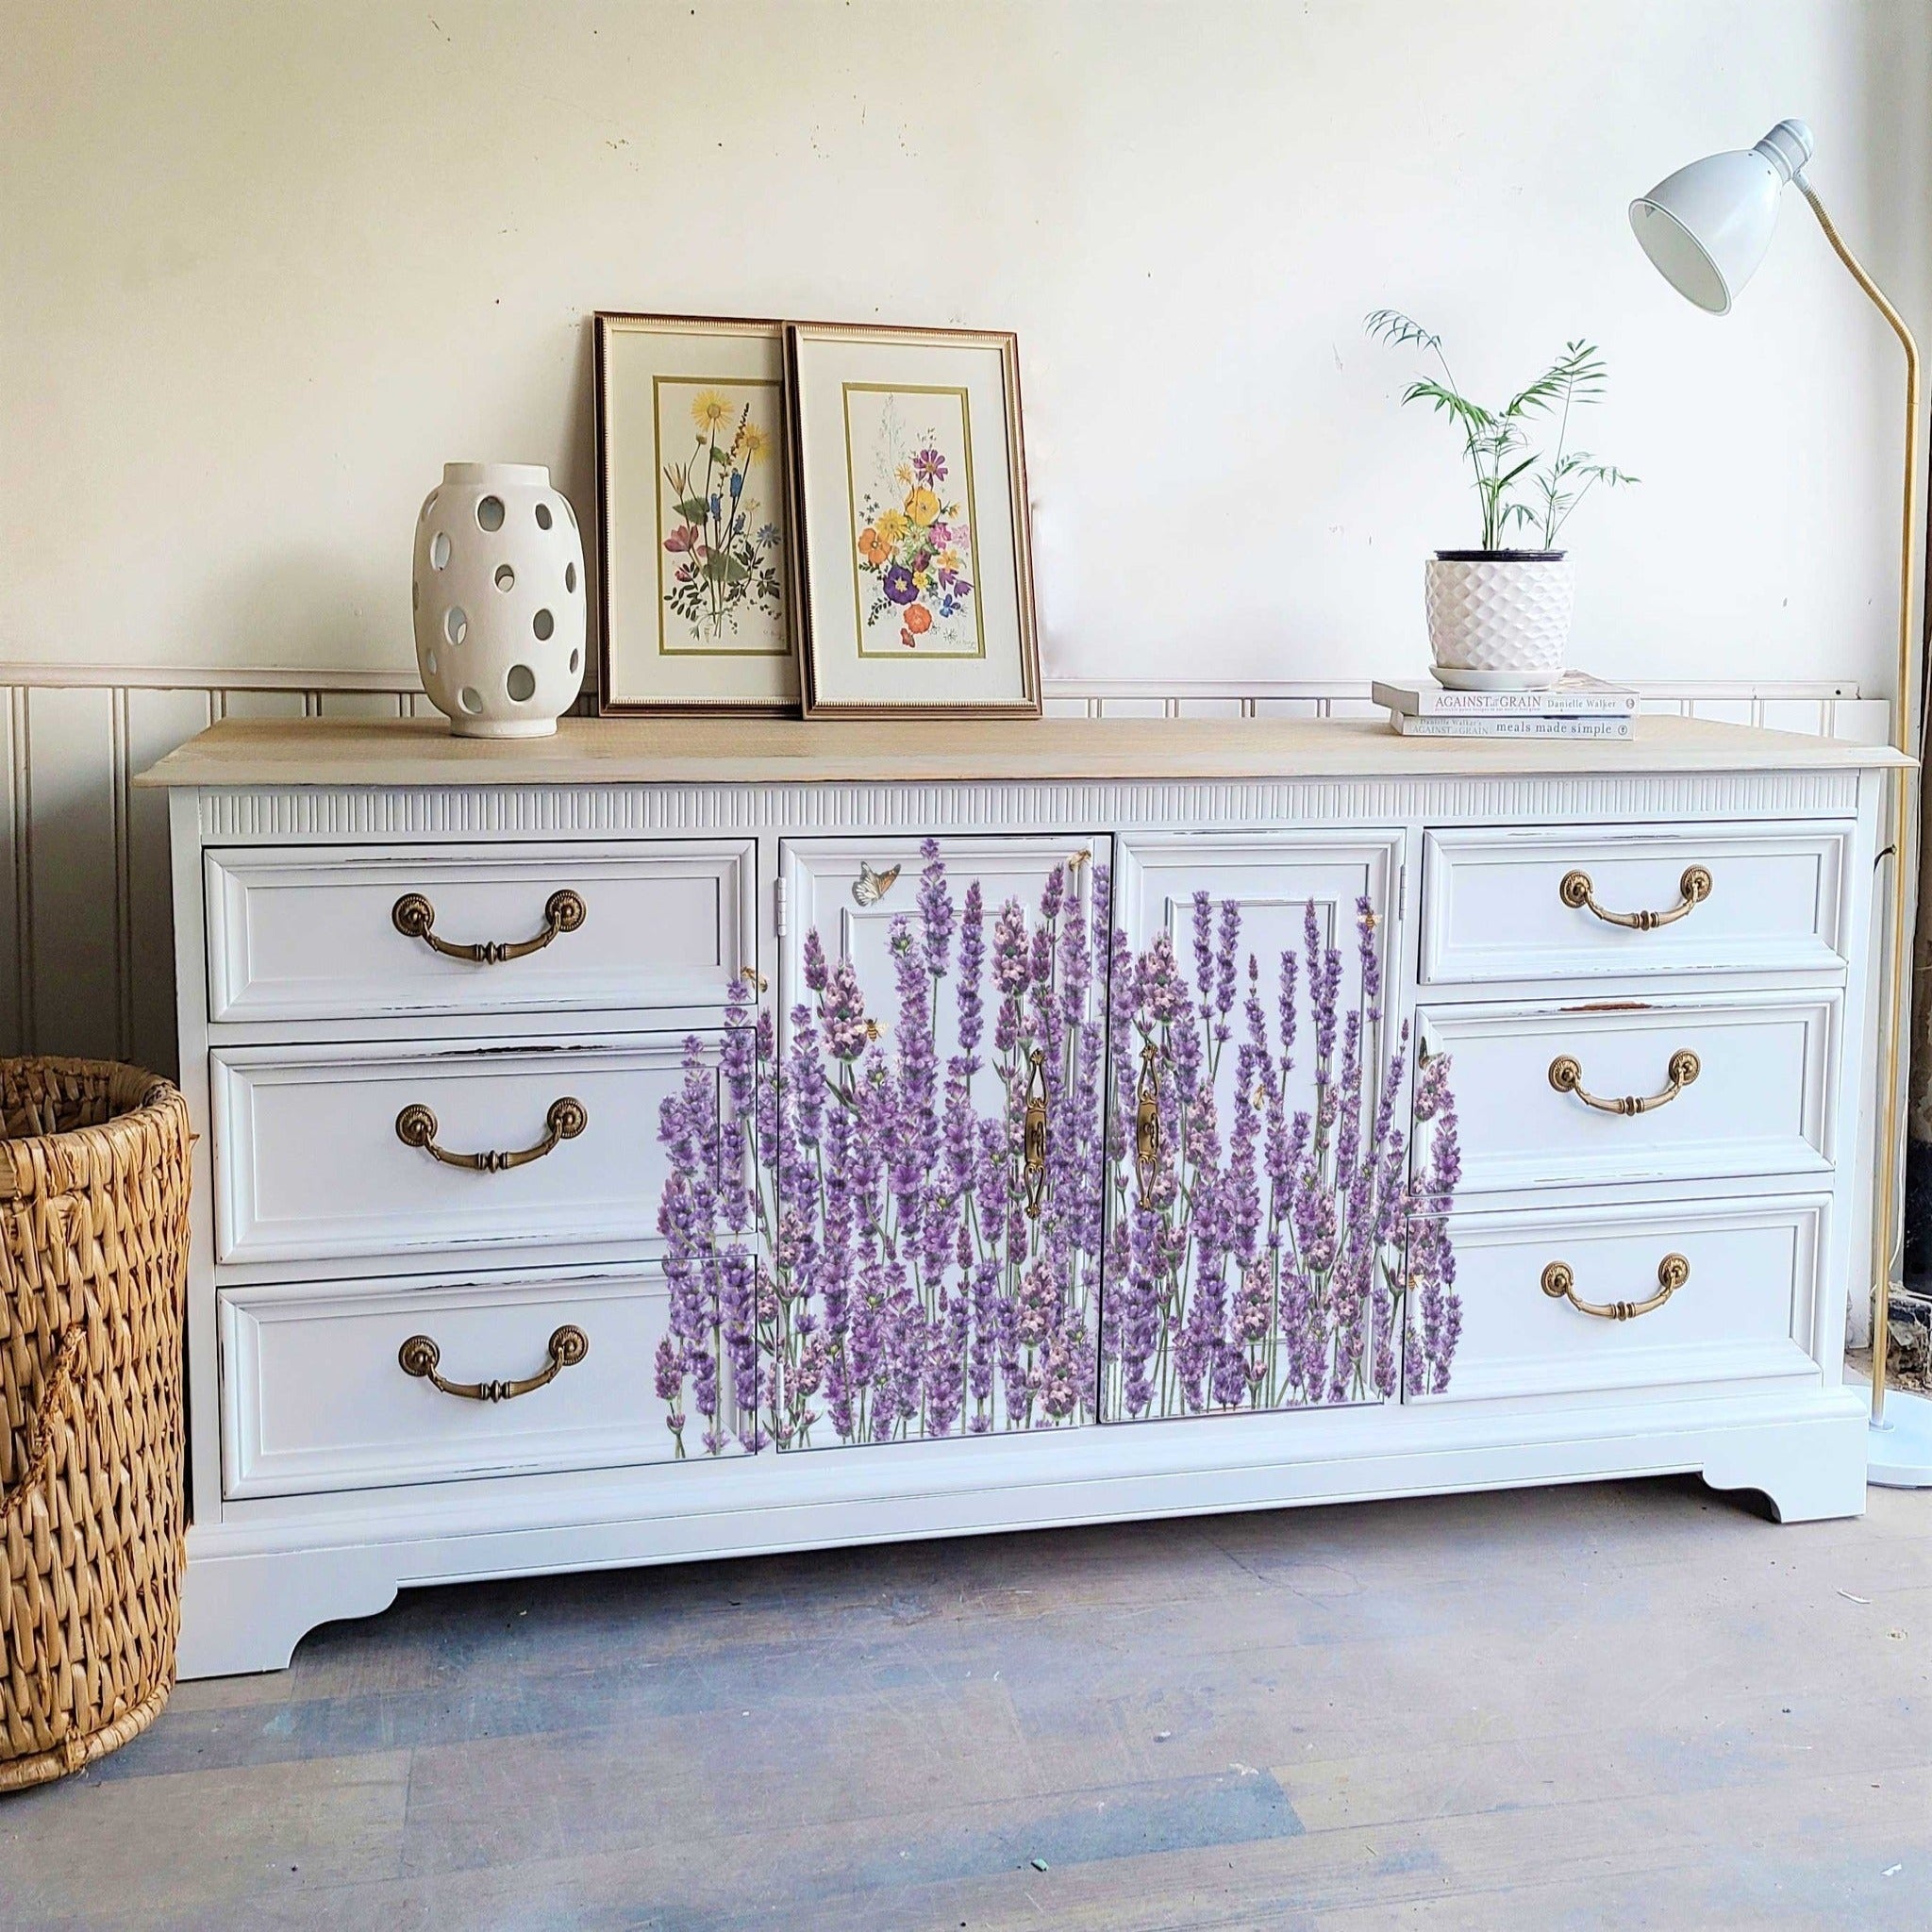 A vintage buffet table is painted light grey and features ReDesign with Prima's Champs de Lavende transfer on the front center.